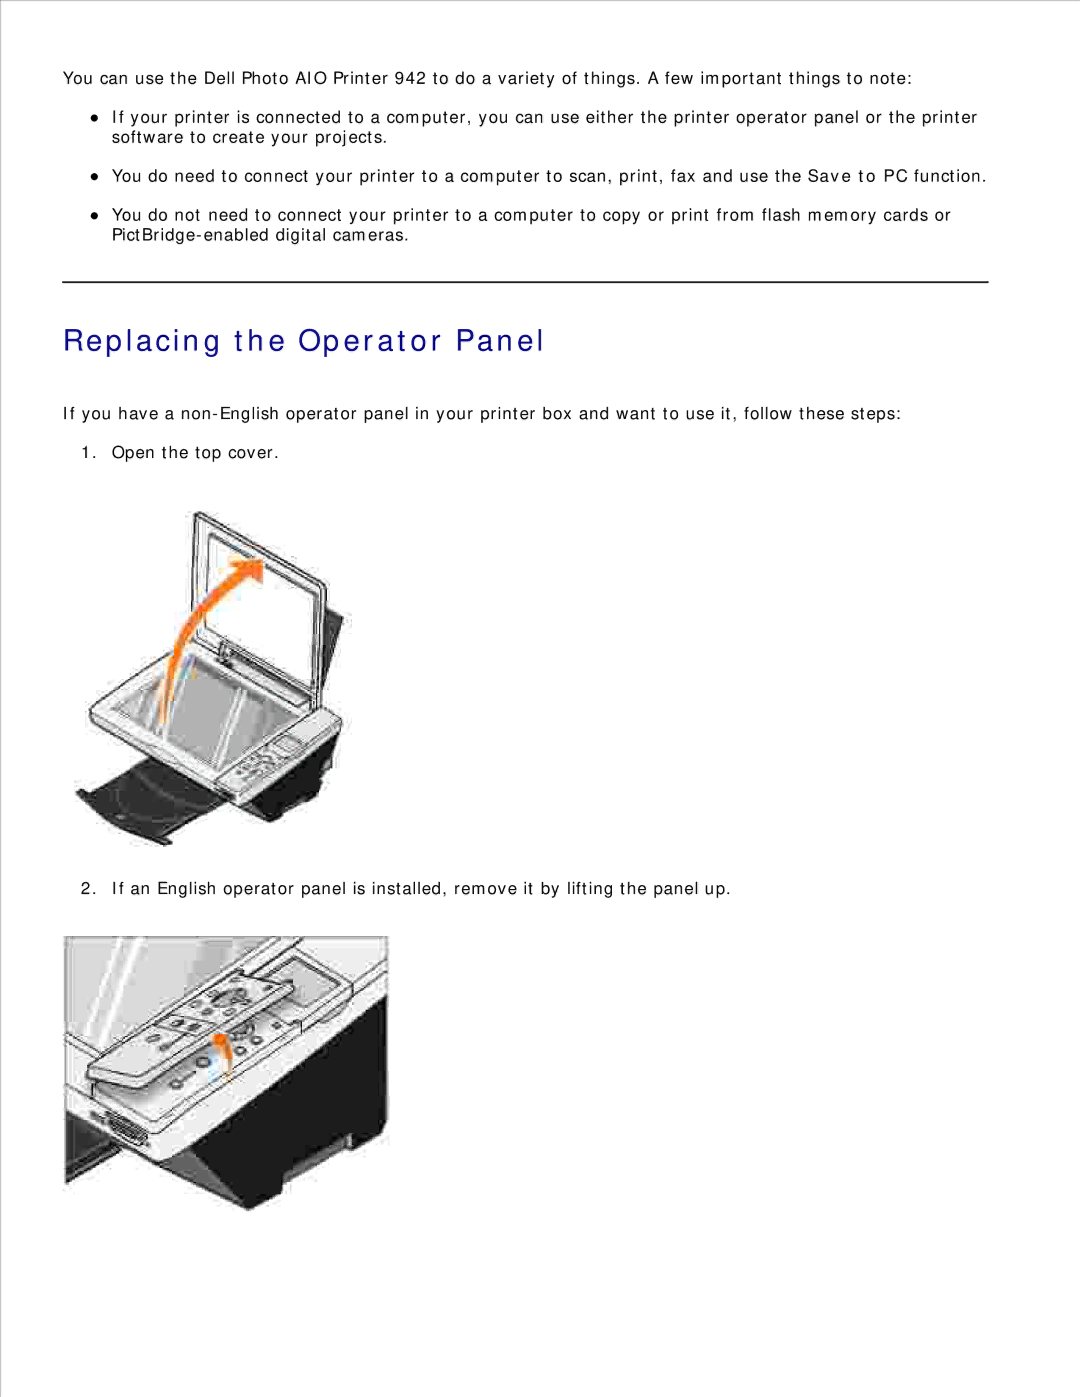 Dell 942 manual Replacing the Operator Panel 